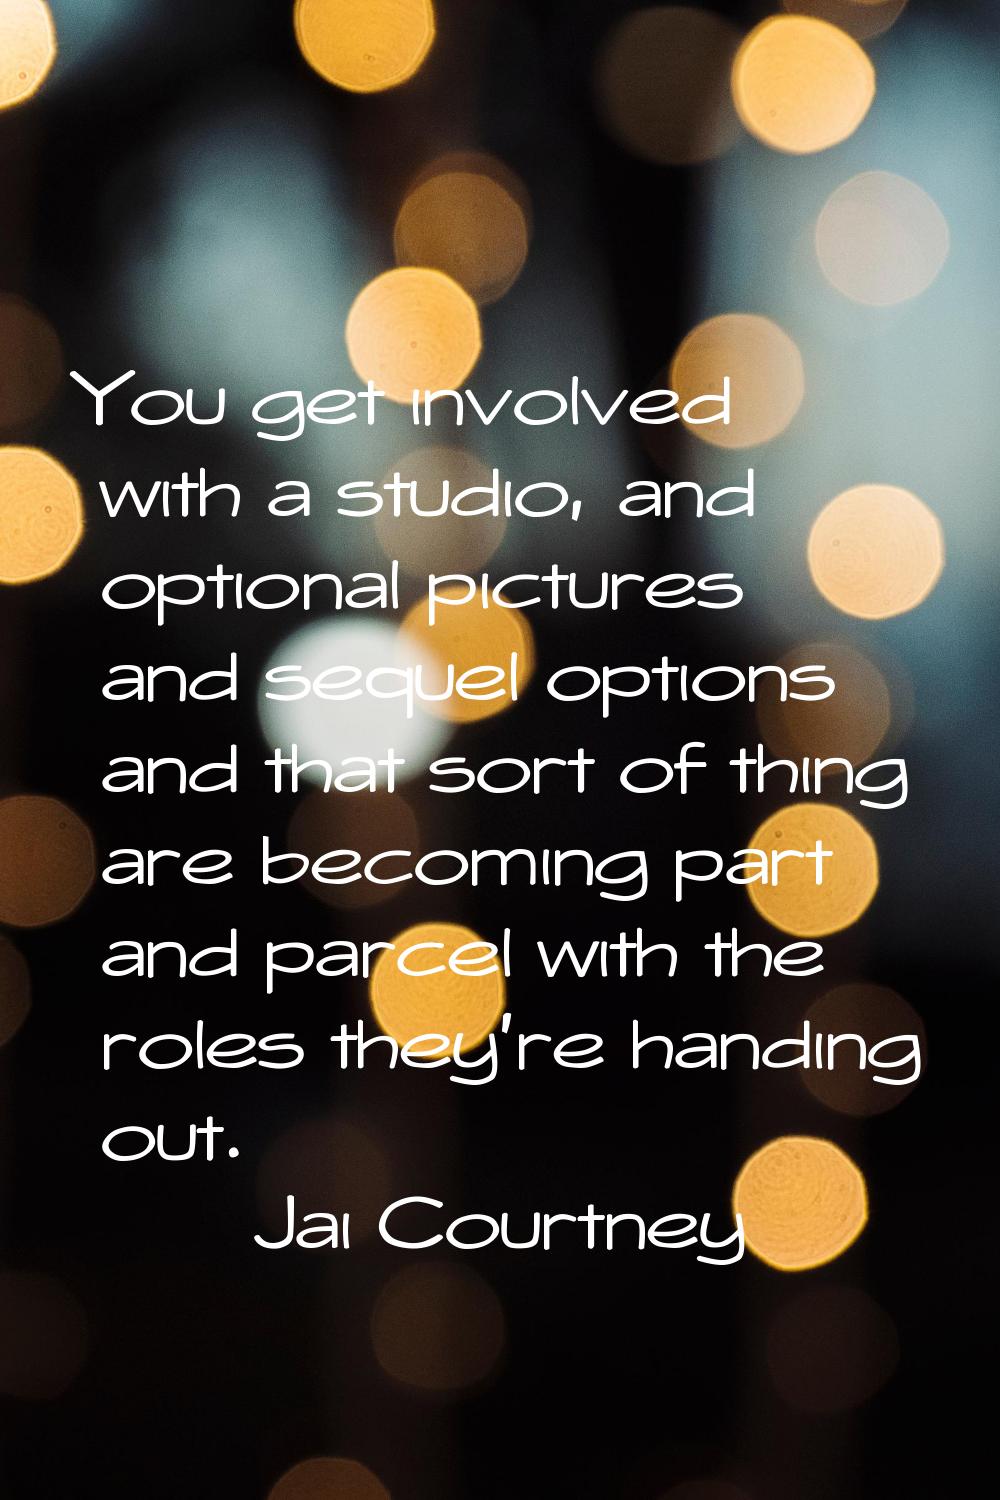 You get involved with a studio, and optional pictures and sequel options and that sort of thing are